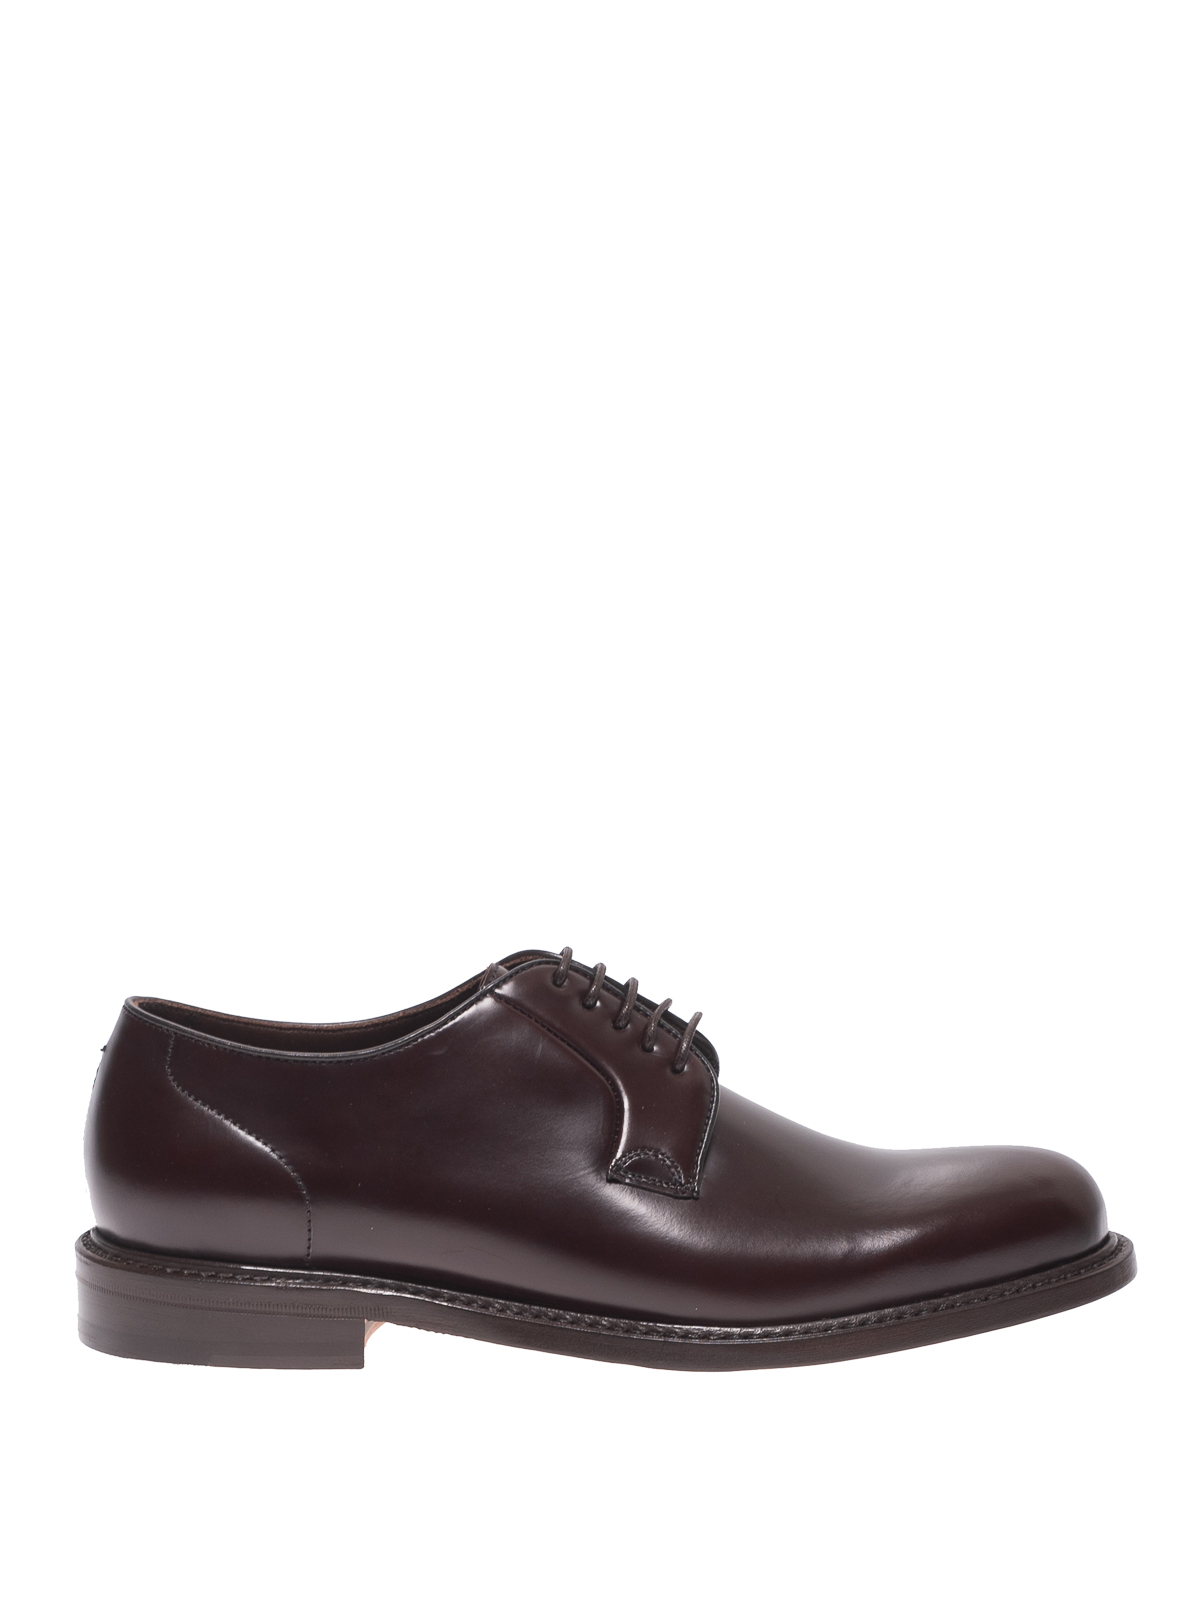 Classic shoes Berwick 1707 - Dark brown smooth leather Derby shoes ...